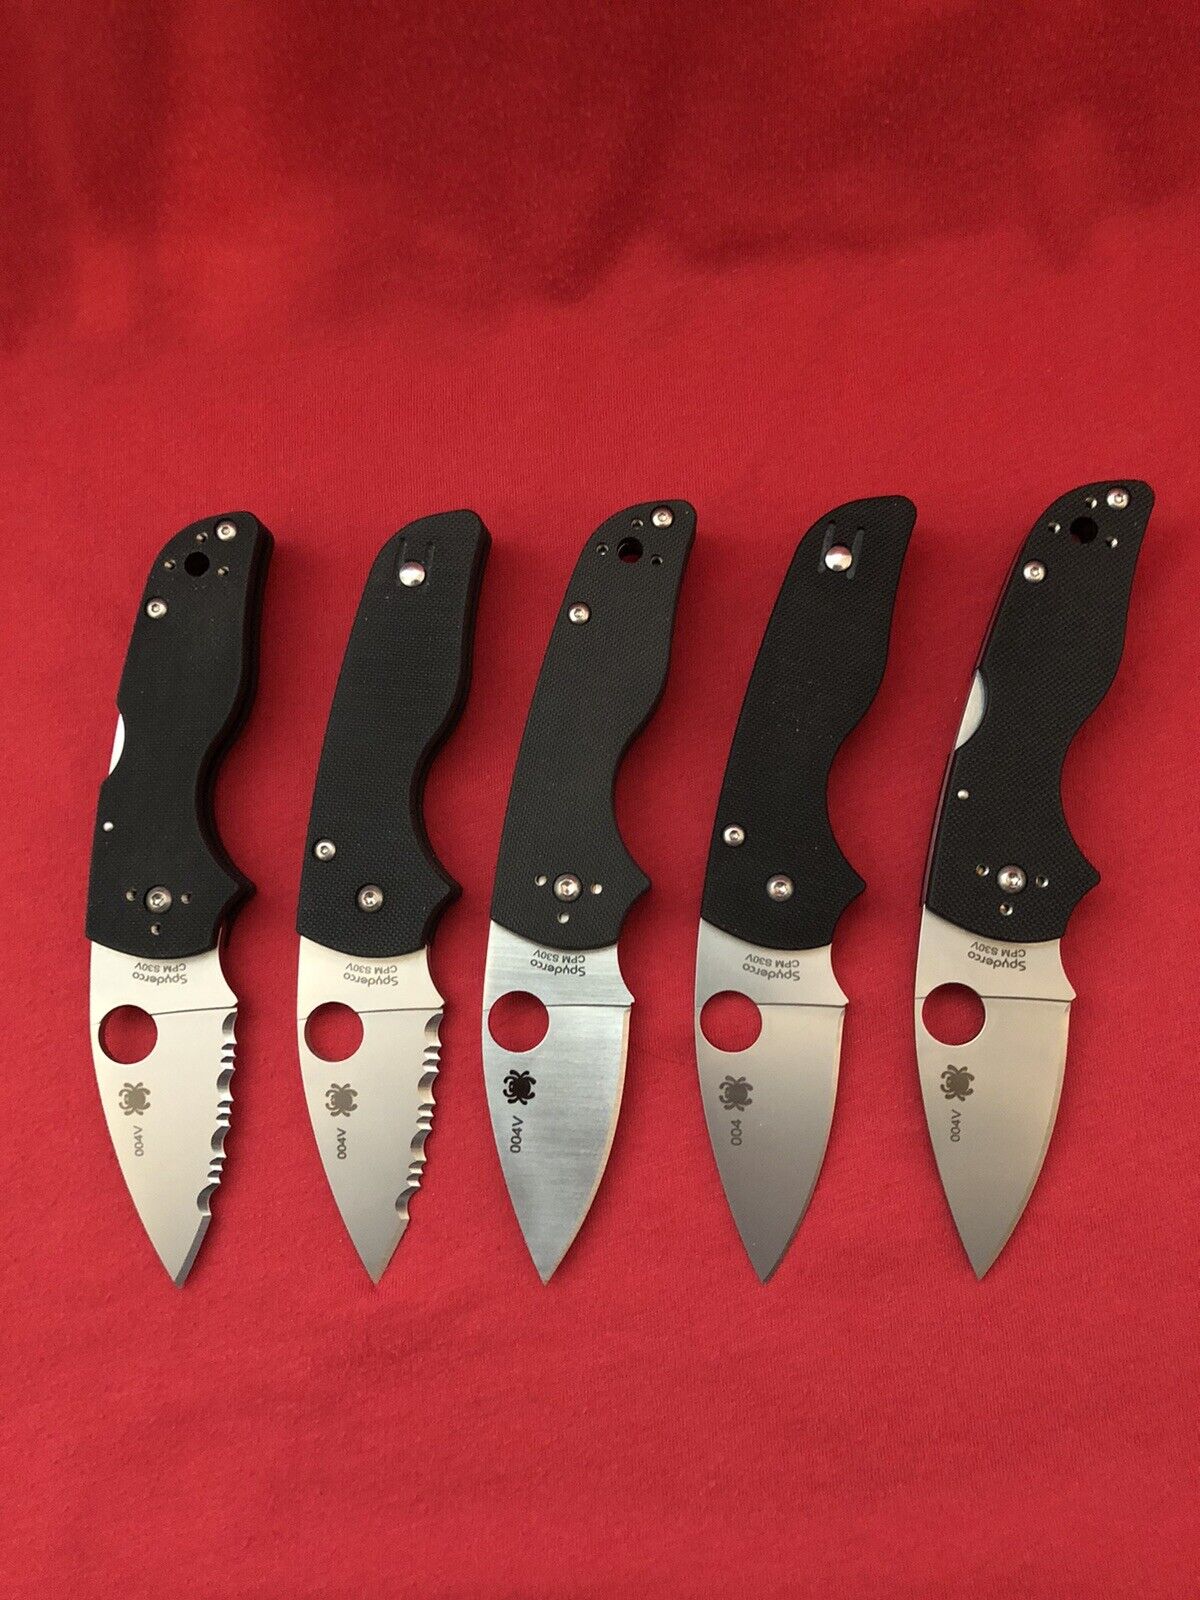 SPYDERCO Lil Native *WHOLESALE* Knife Lot Collector Club #004 Rare BRAND NEW